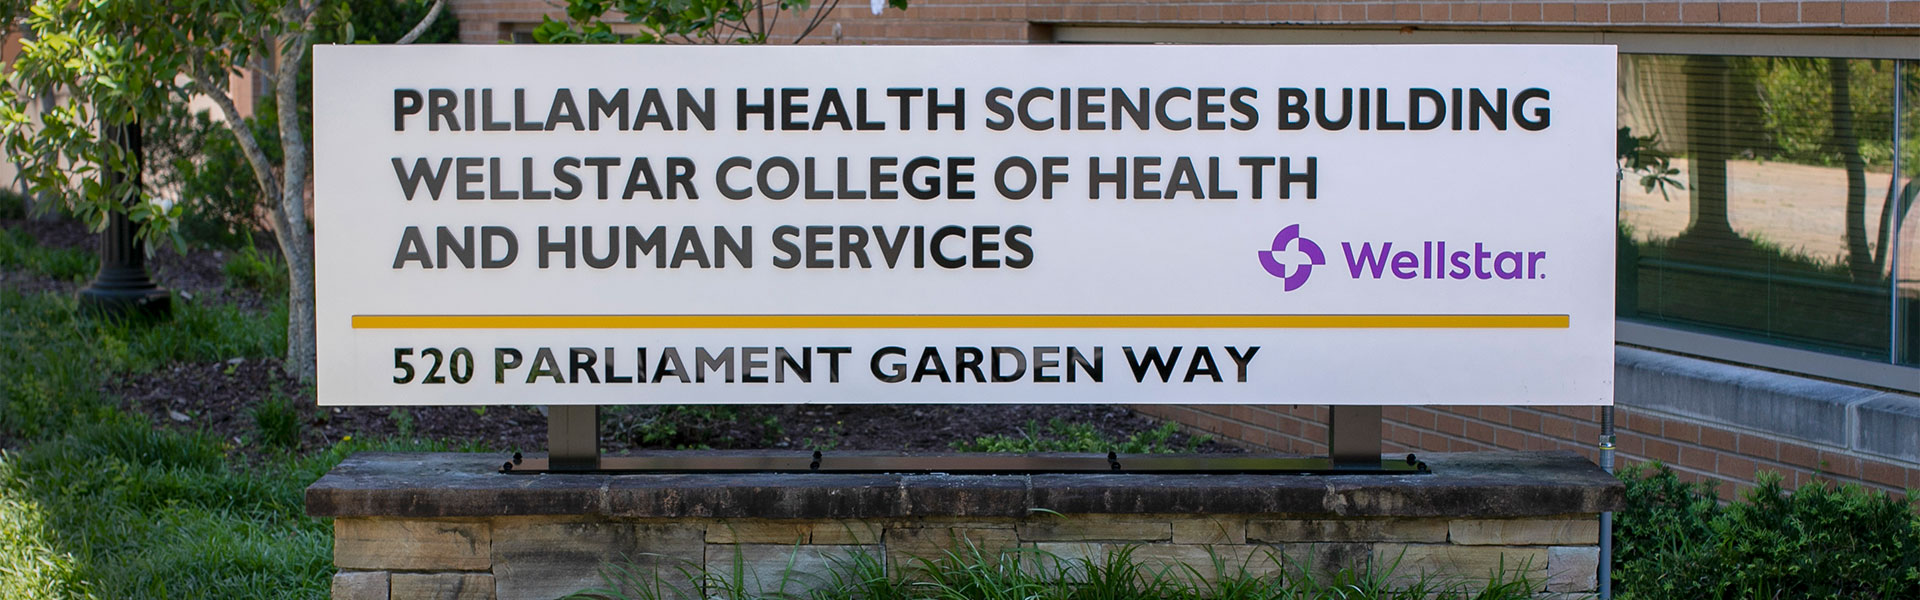 Prillaman Health Sciences Building Wellstar College of Health and Human Services sign.